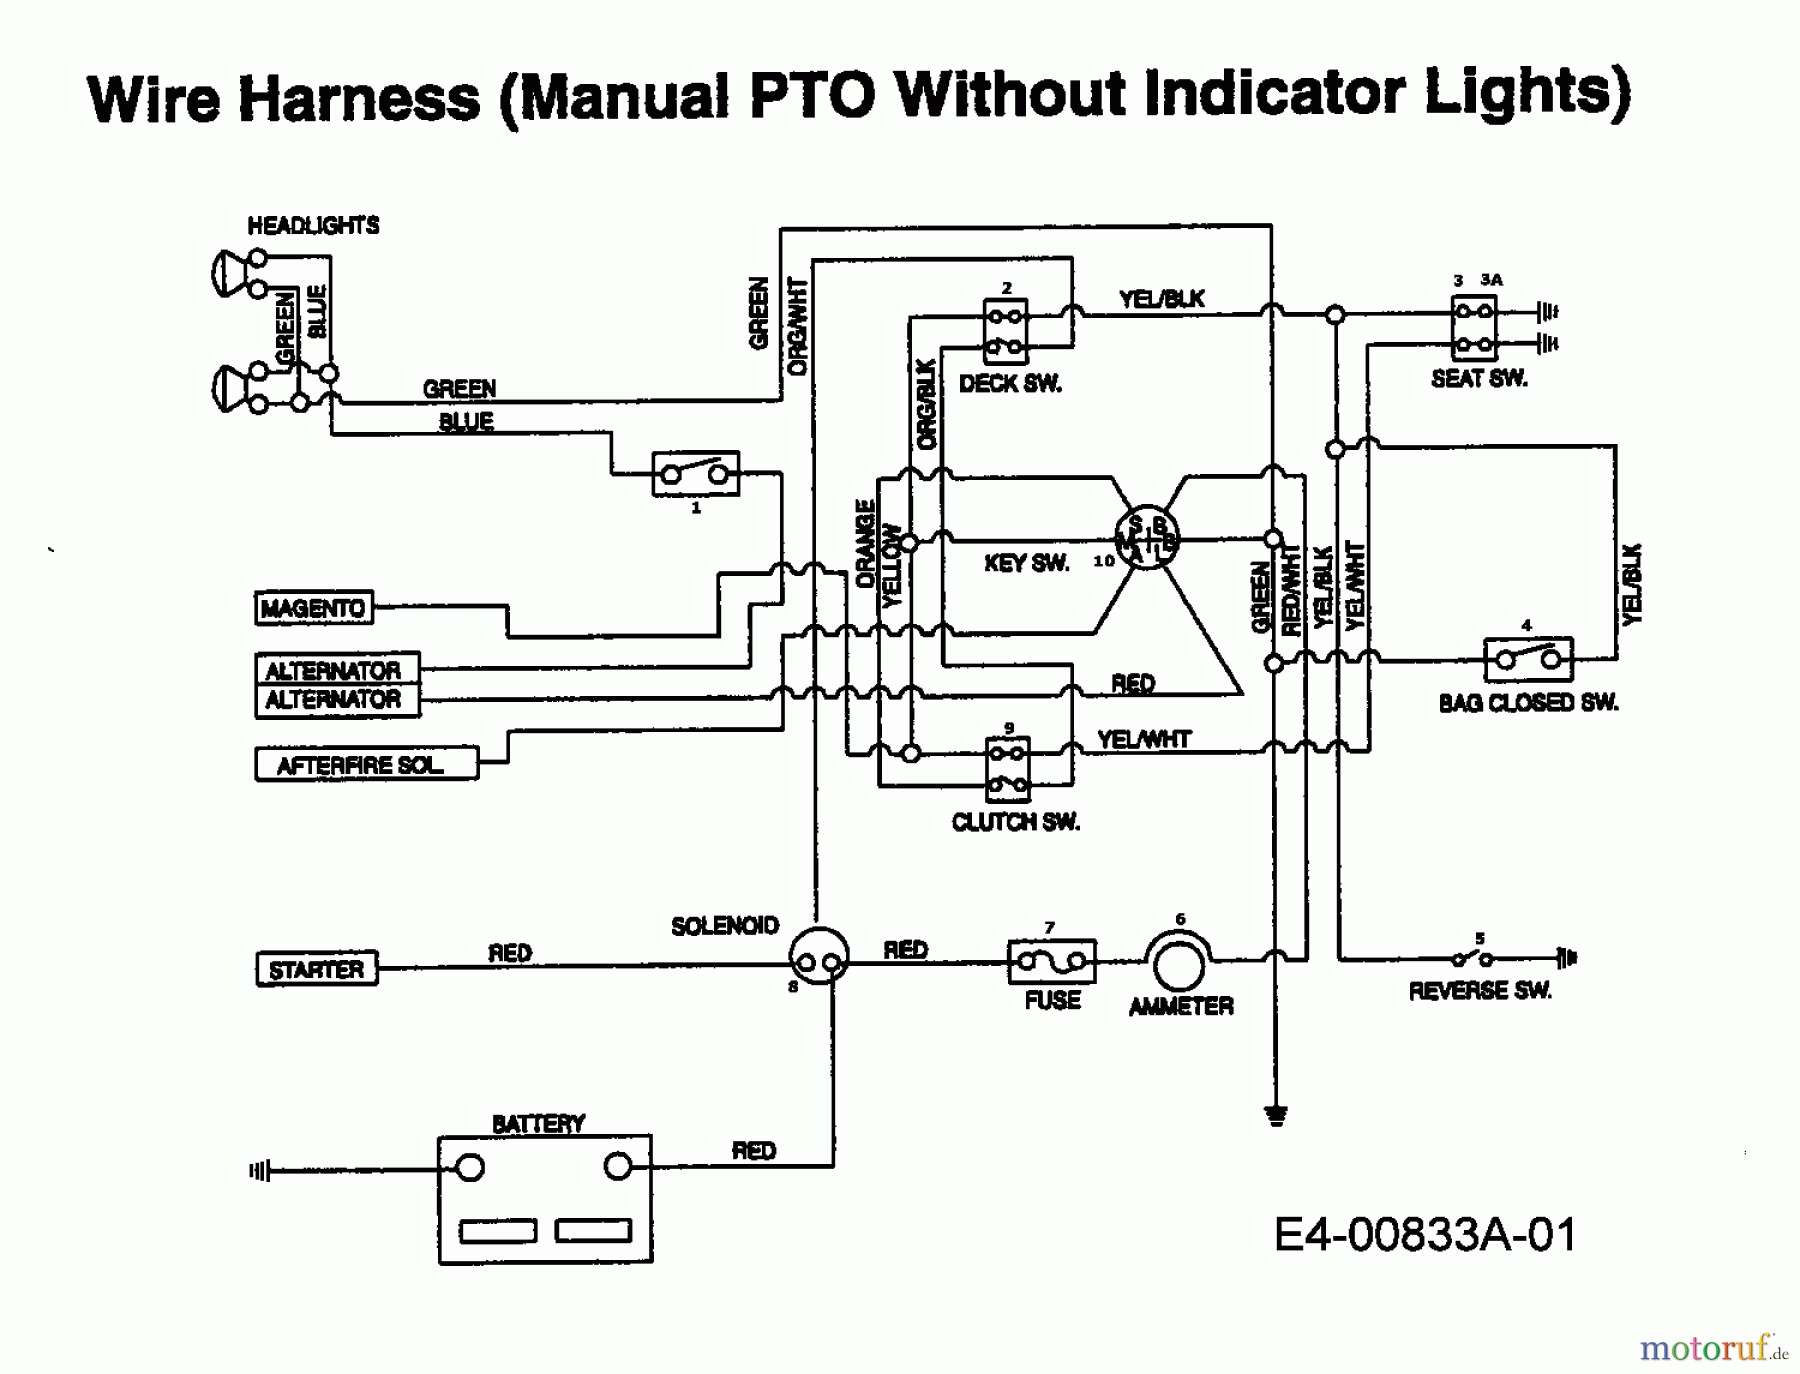  MTD Lawn tractors IB 162 HST 13AF795N606  (1998) Wiring diagram without indicator lights